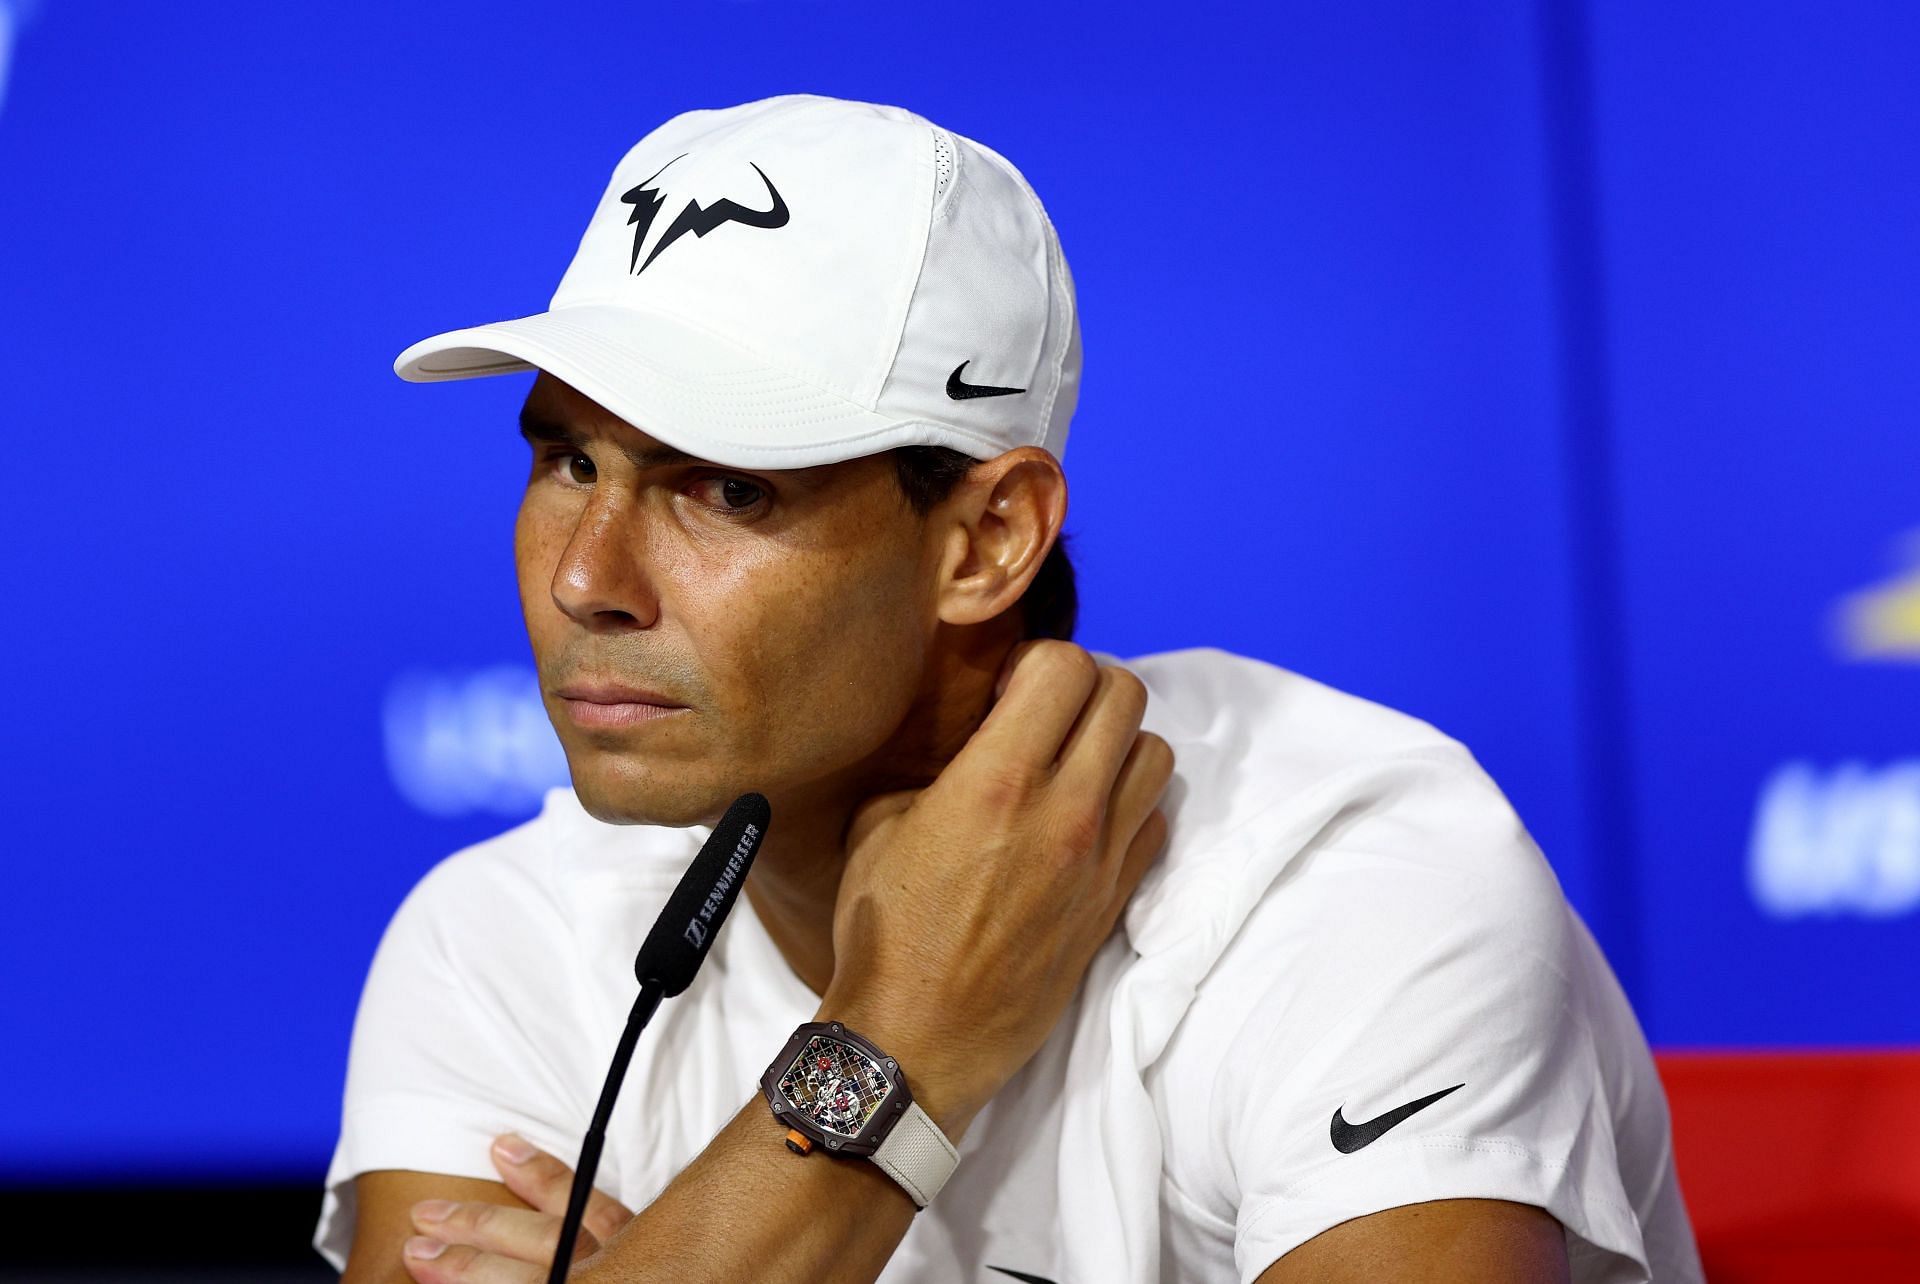 Rafael Nadal faced a fourth-round exit at the 2022 US Open